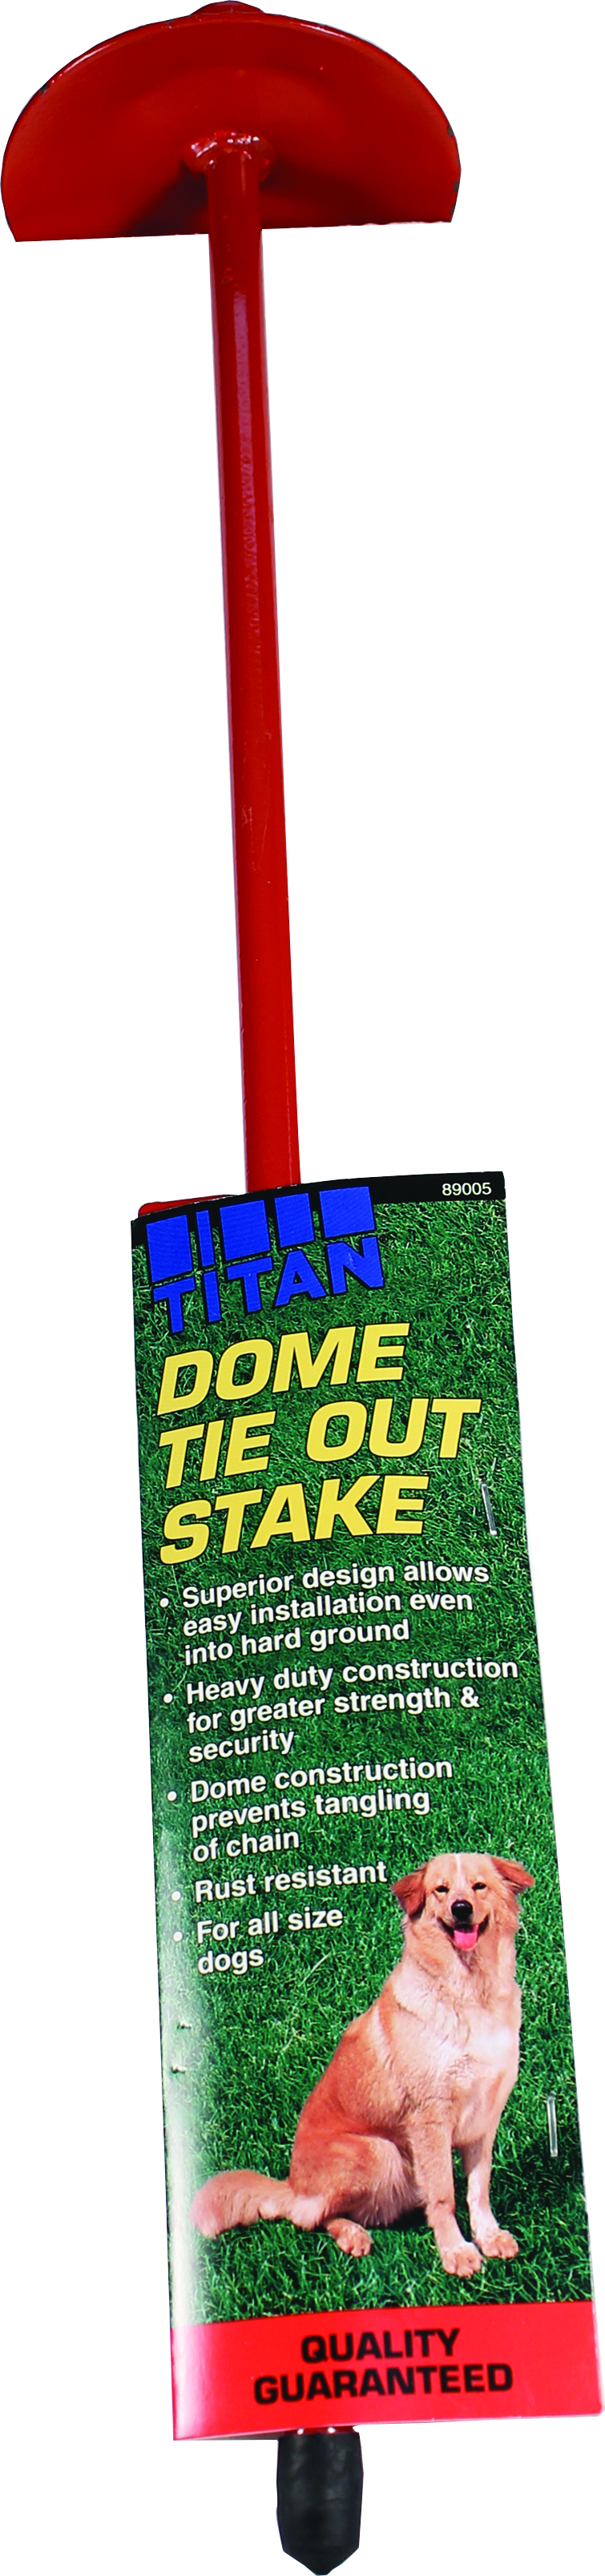 TITAN DOME TIE OUT STABLE